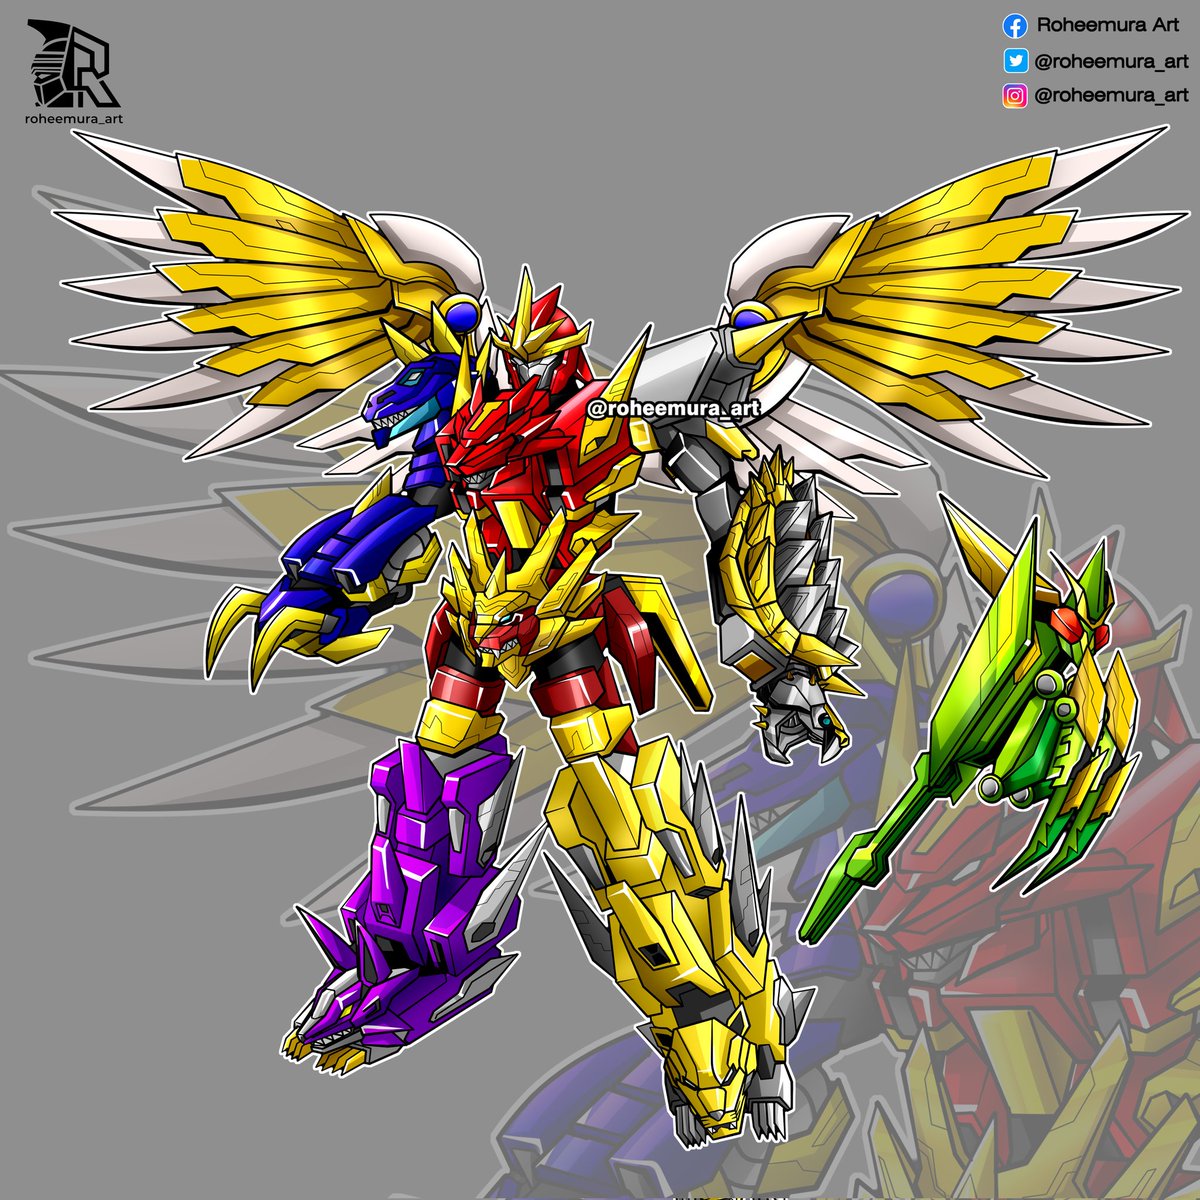 Finally, Power Rangers Ancient Guardian Megazord!! 
Commission for @scottiespassky (the awesome thing is he asked his family member to choose each zords animal) 

#supersentai #特撮
#tokusatsu #powerrangers #mmpr #giantrobot #mechagattai #gattai #zords #megazord